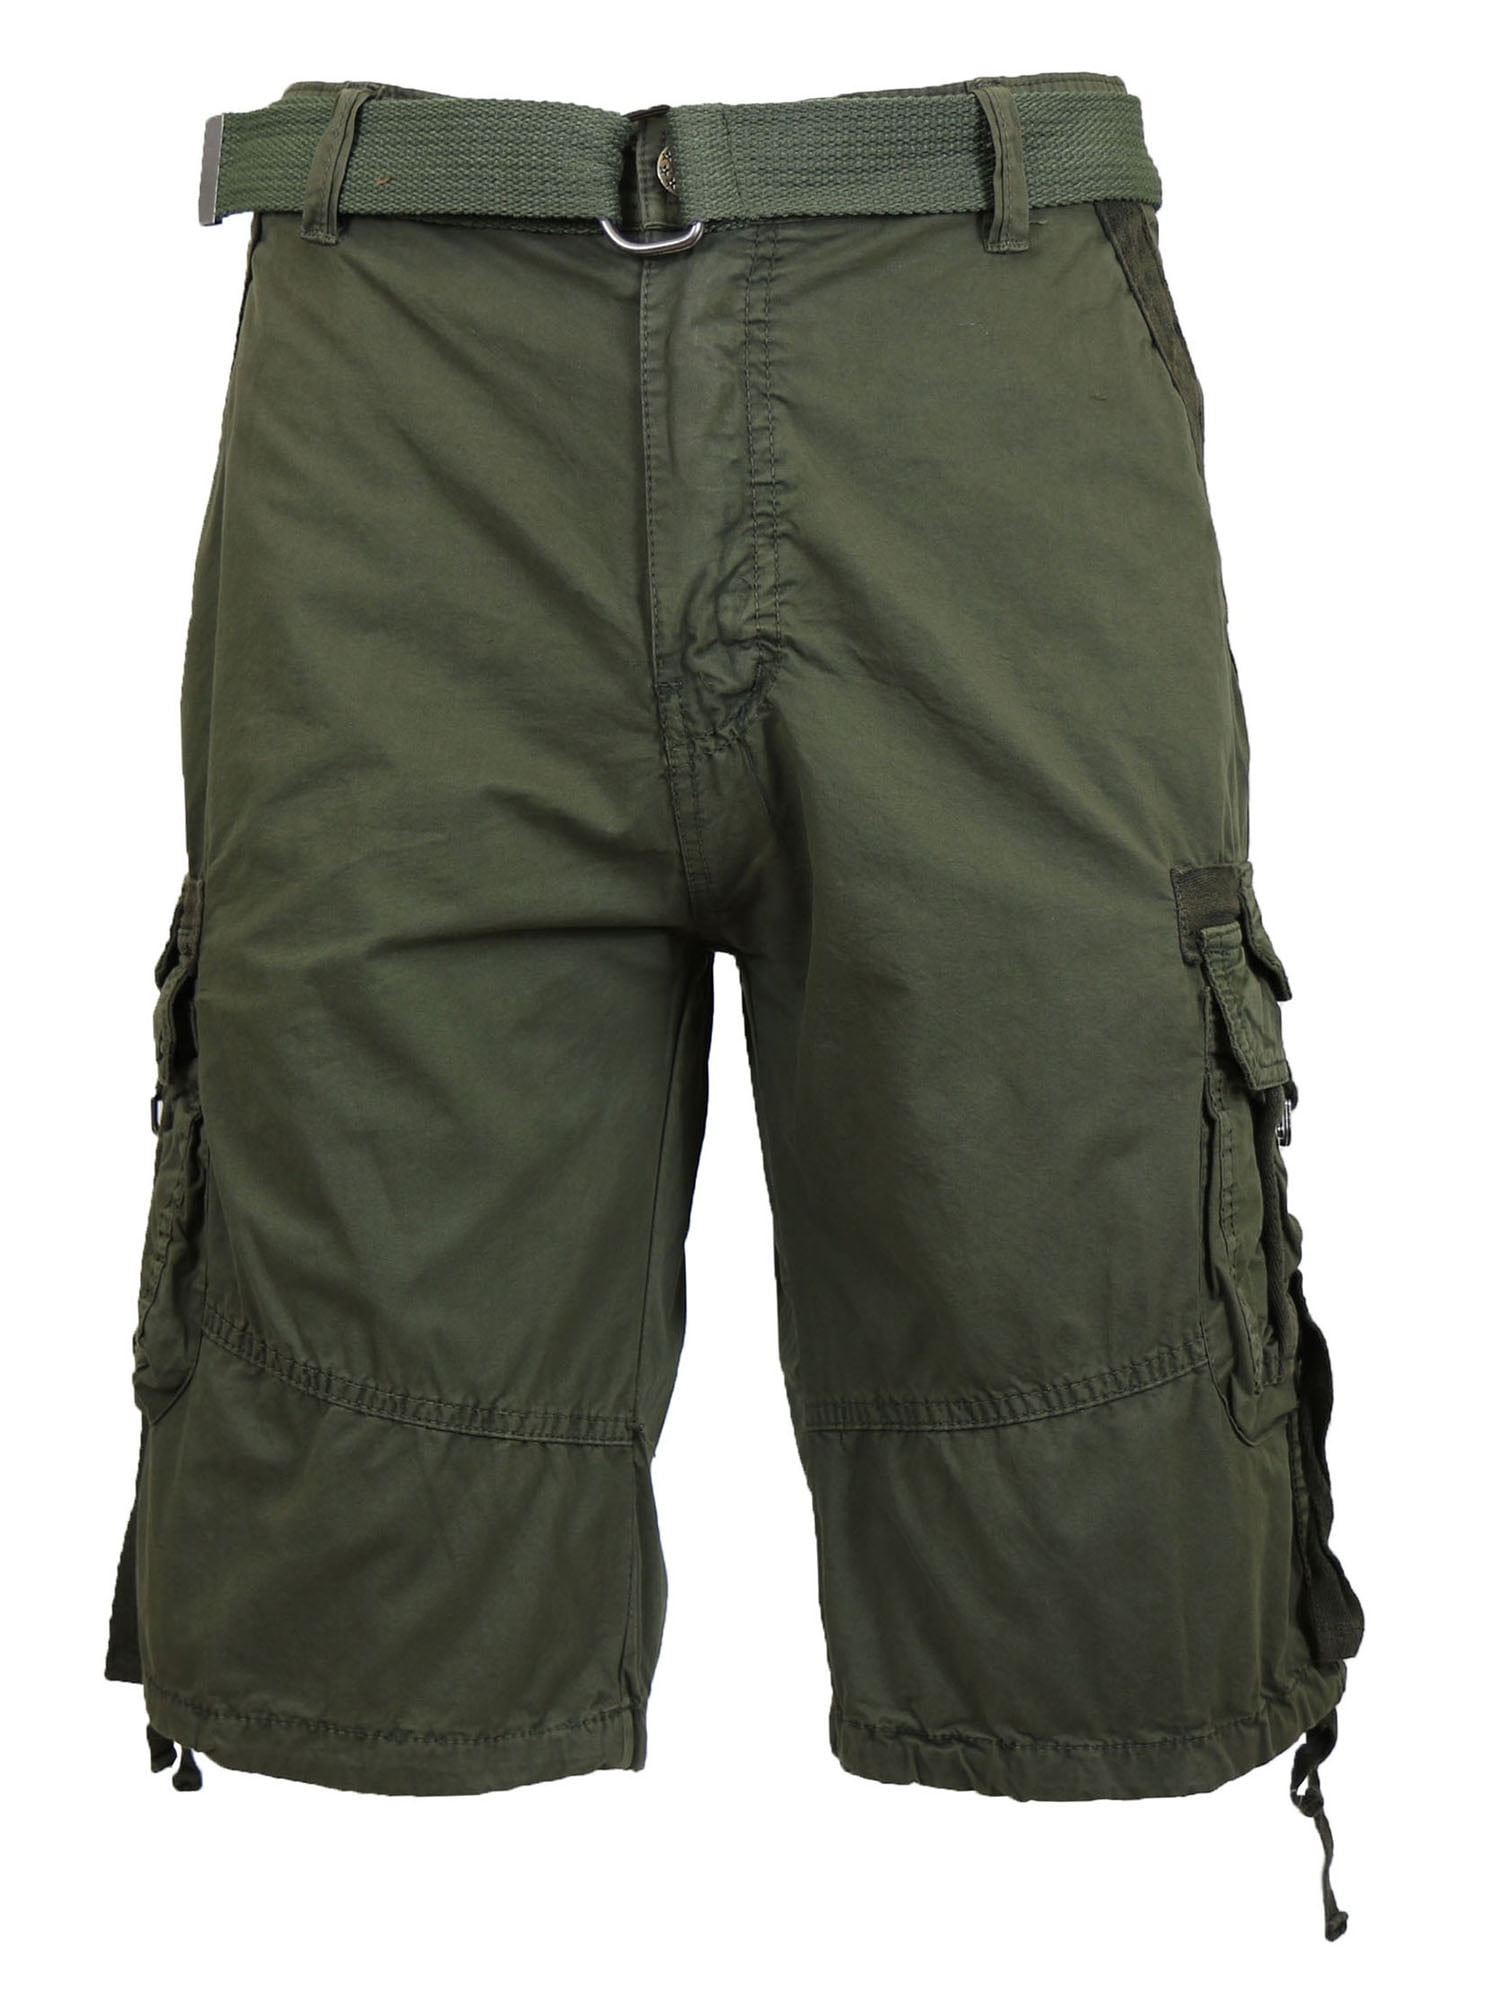 Mens cargo summer walking 5 pockets cotton shorts with belt loops cotton 32-48 